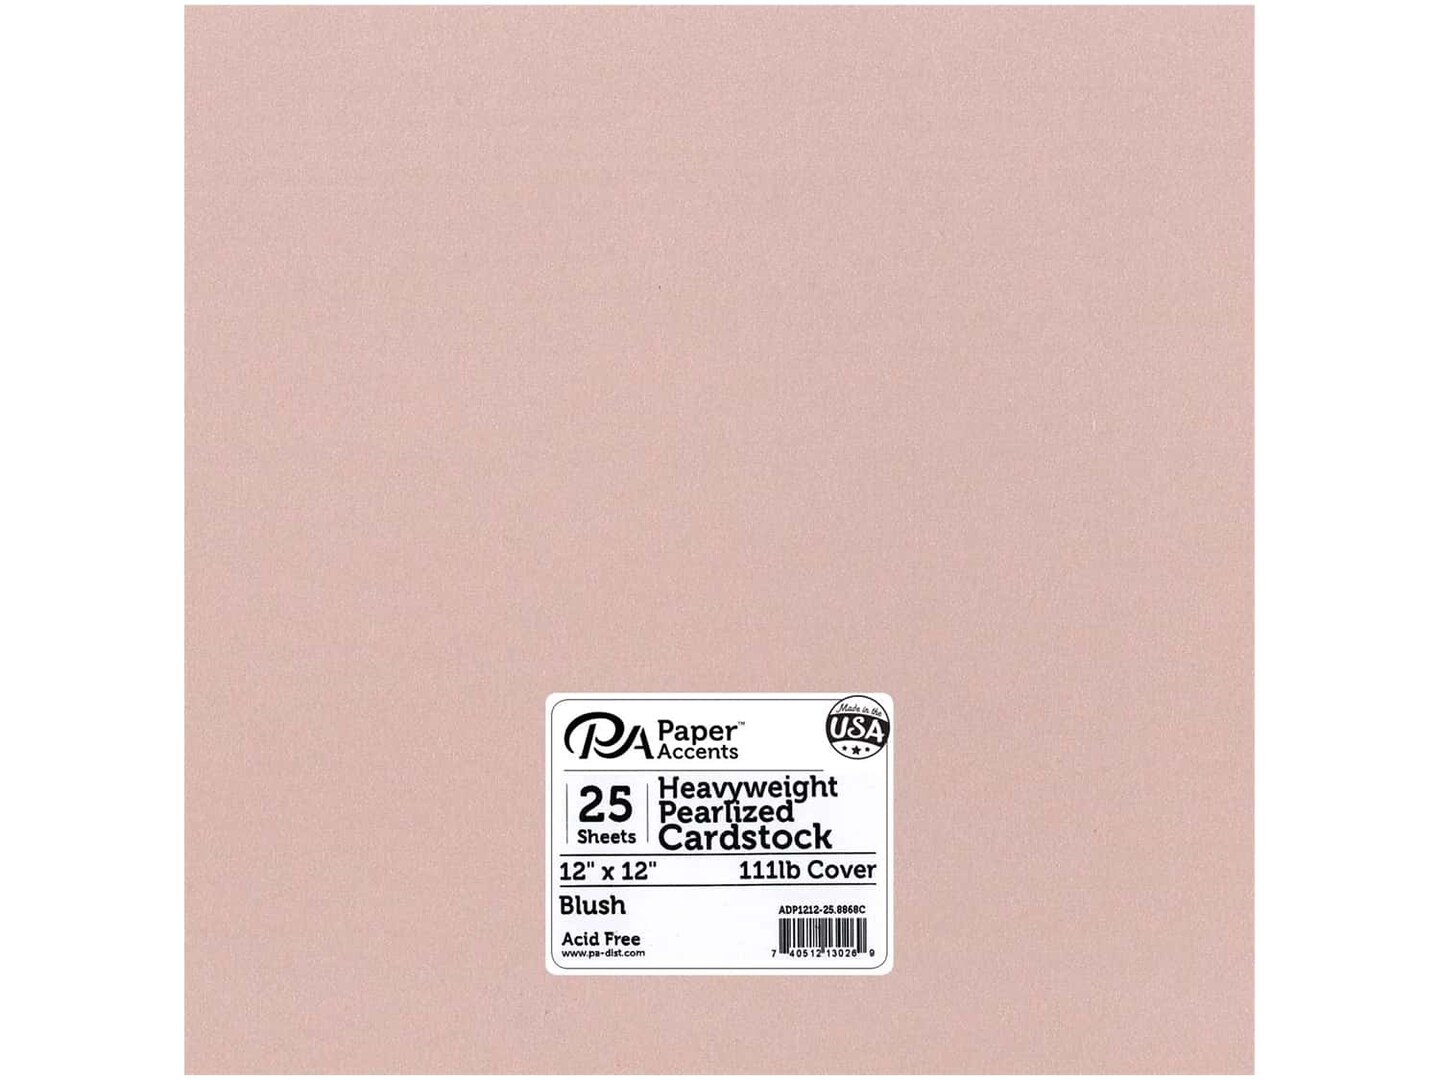 Paper Accents Pearlized Cardstock - 12 x 12 in. - #8868C Blush 25 pc ...